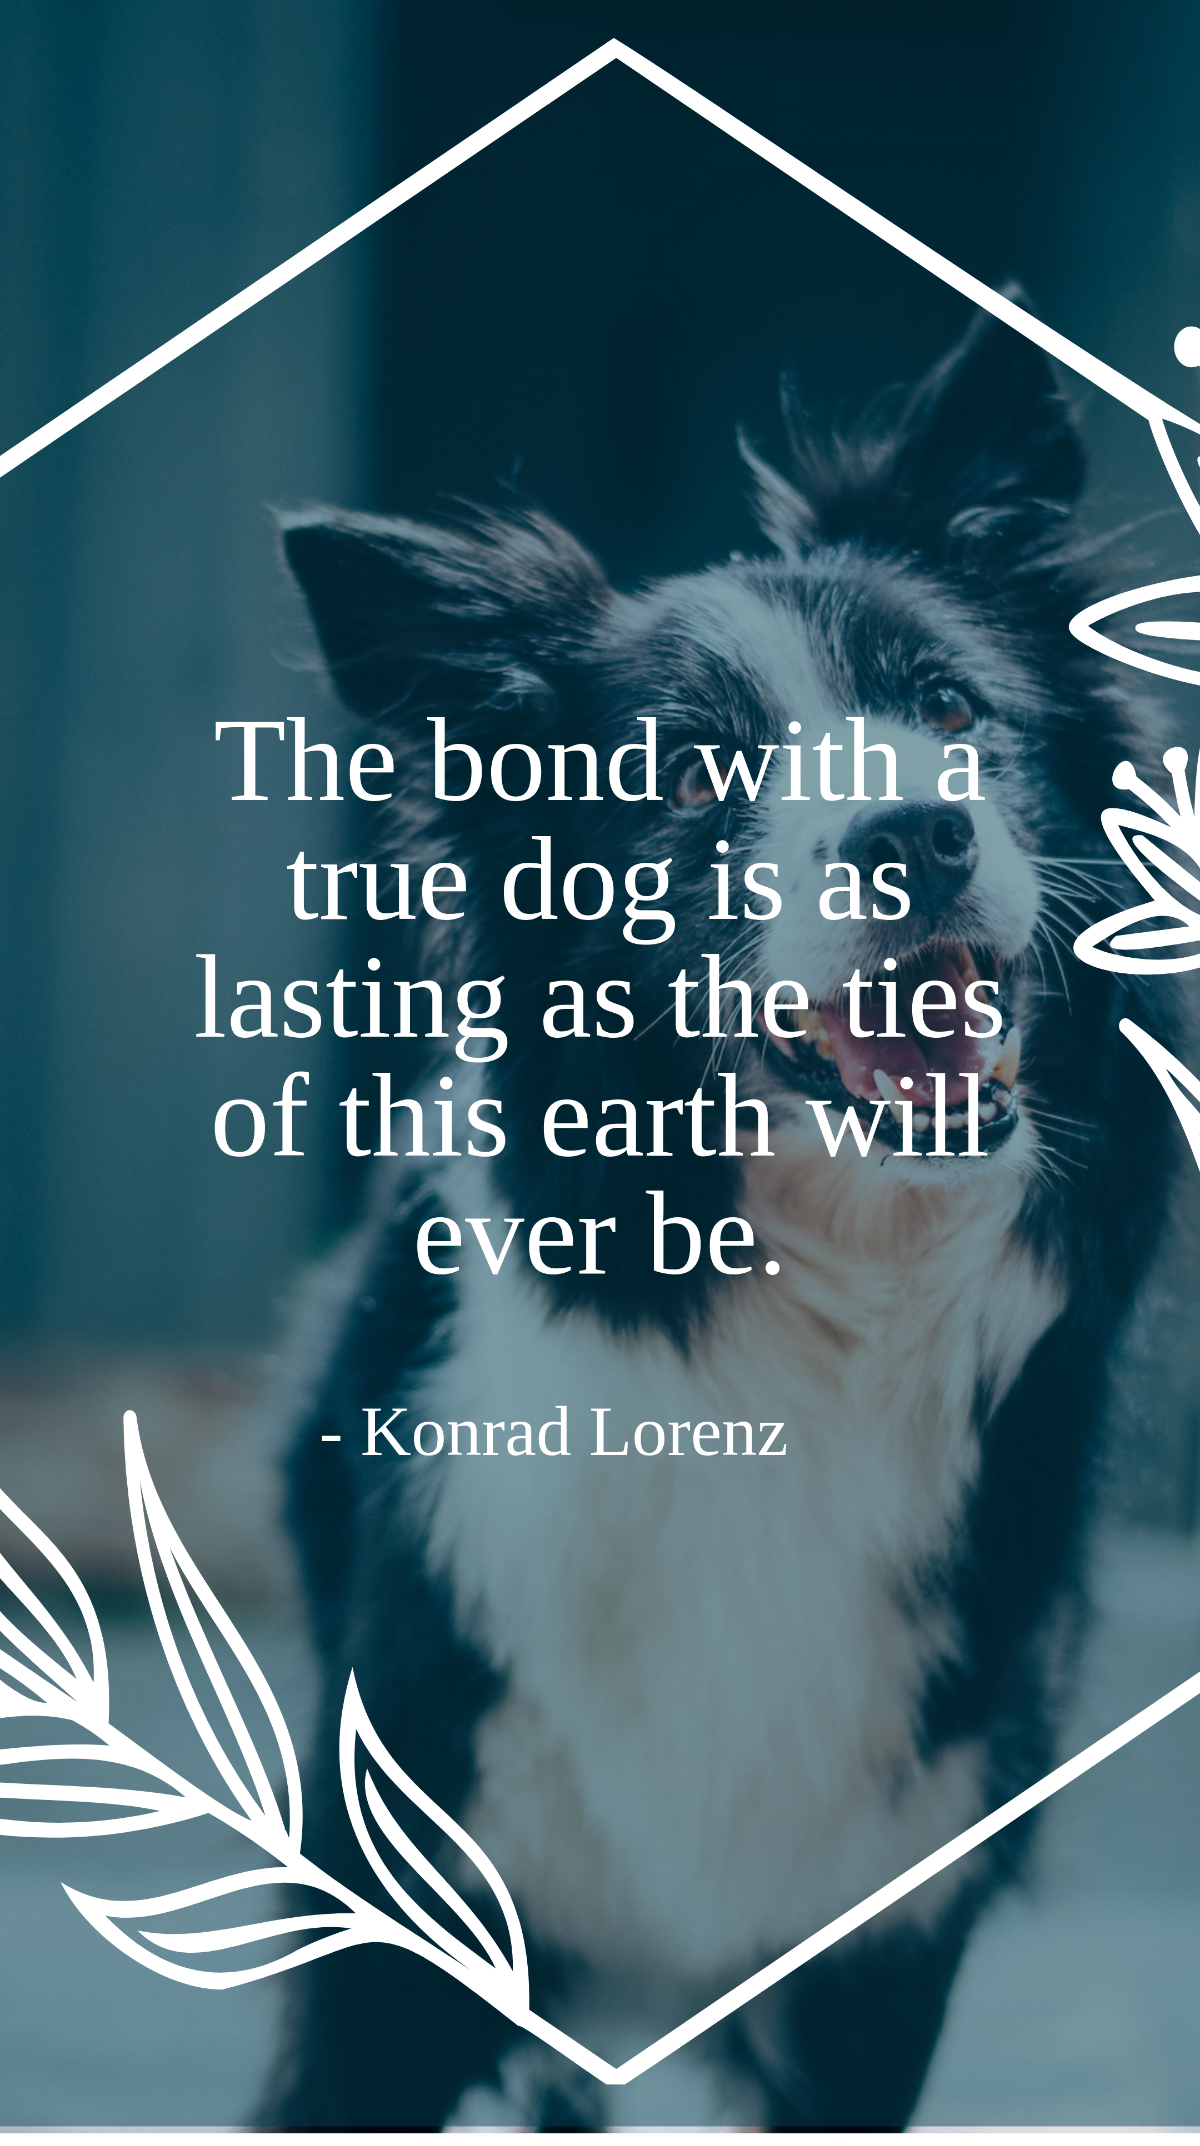 Free Konrad Lorenz - The bond with a true dog is as lasting as the ties of this earth will ever be. Template